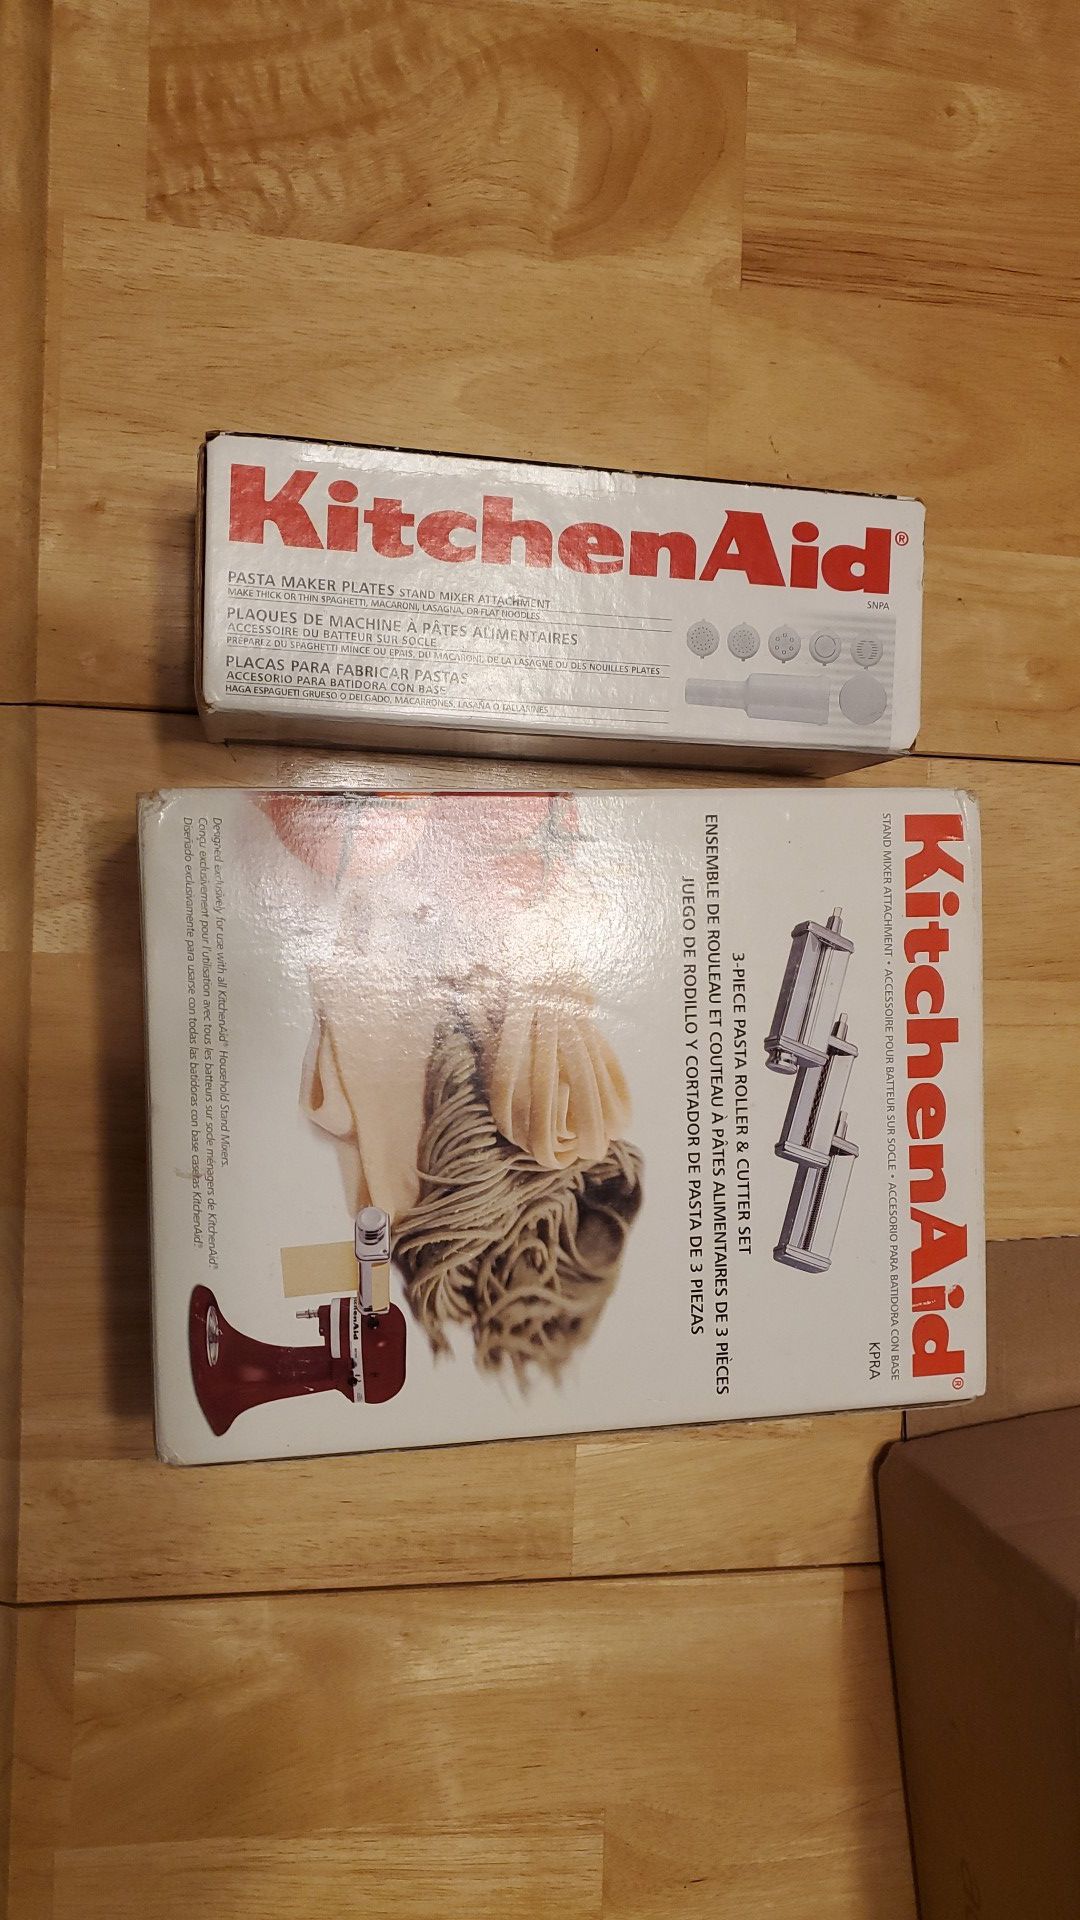 Kitchen Aid 3 piece plaster roller and cutter